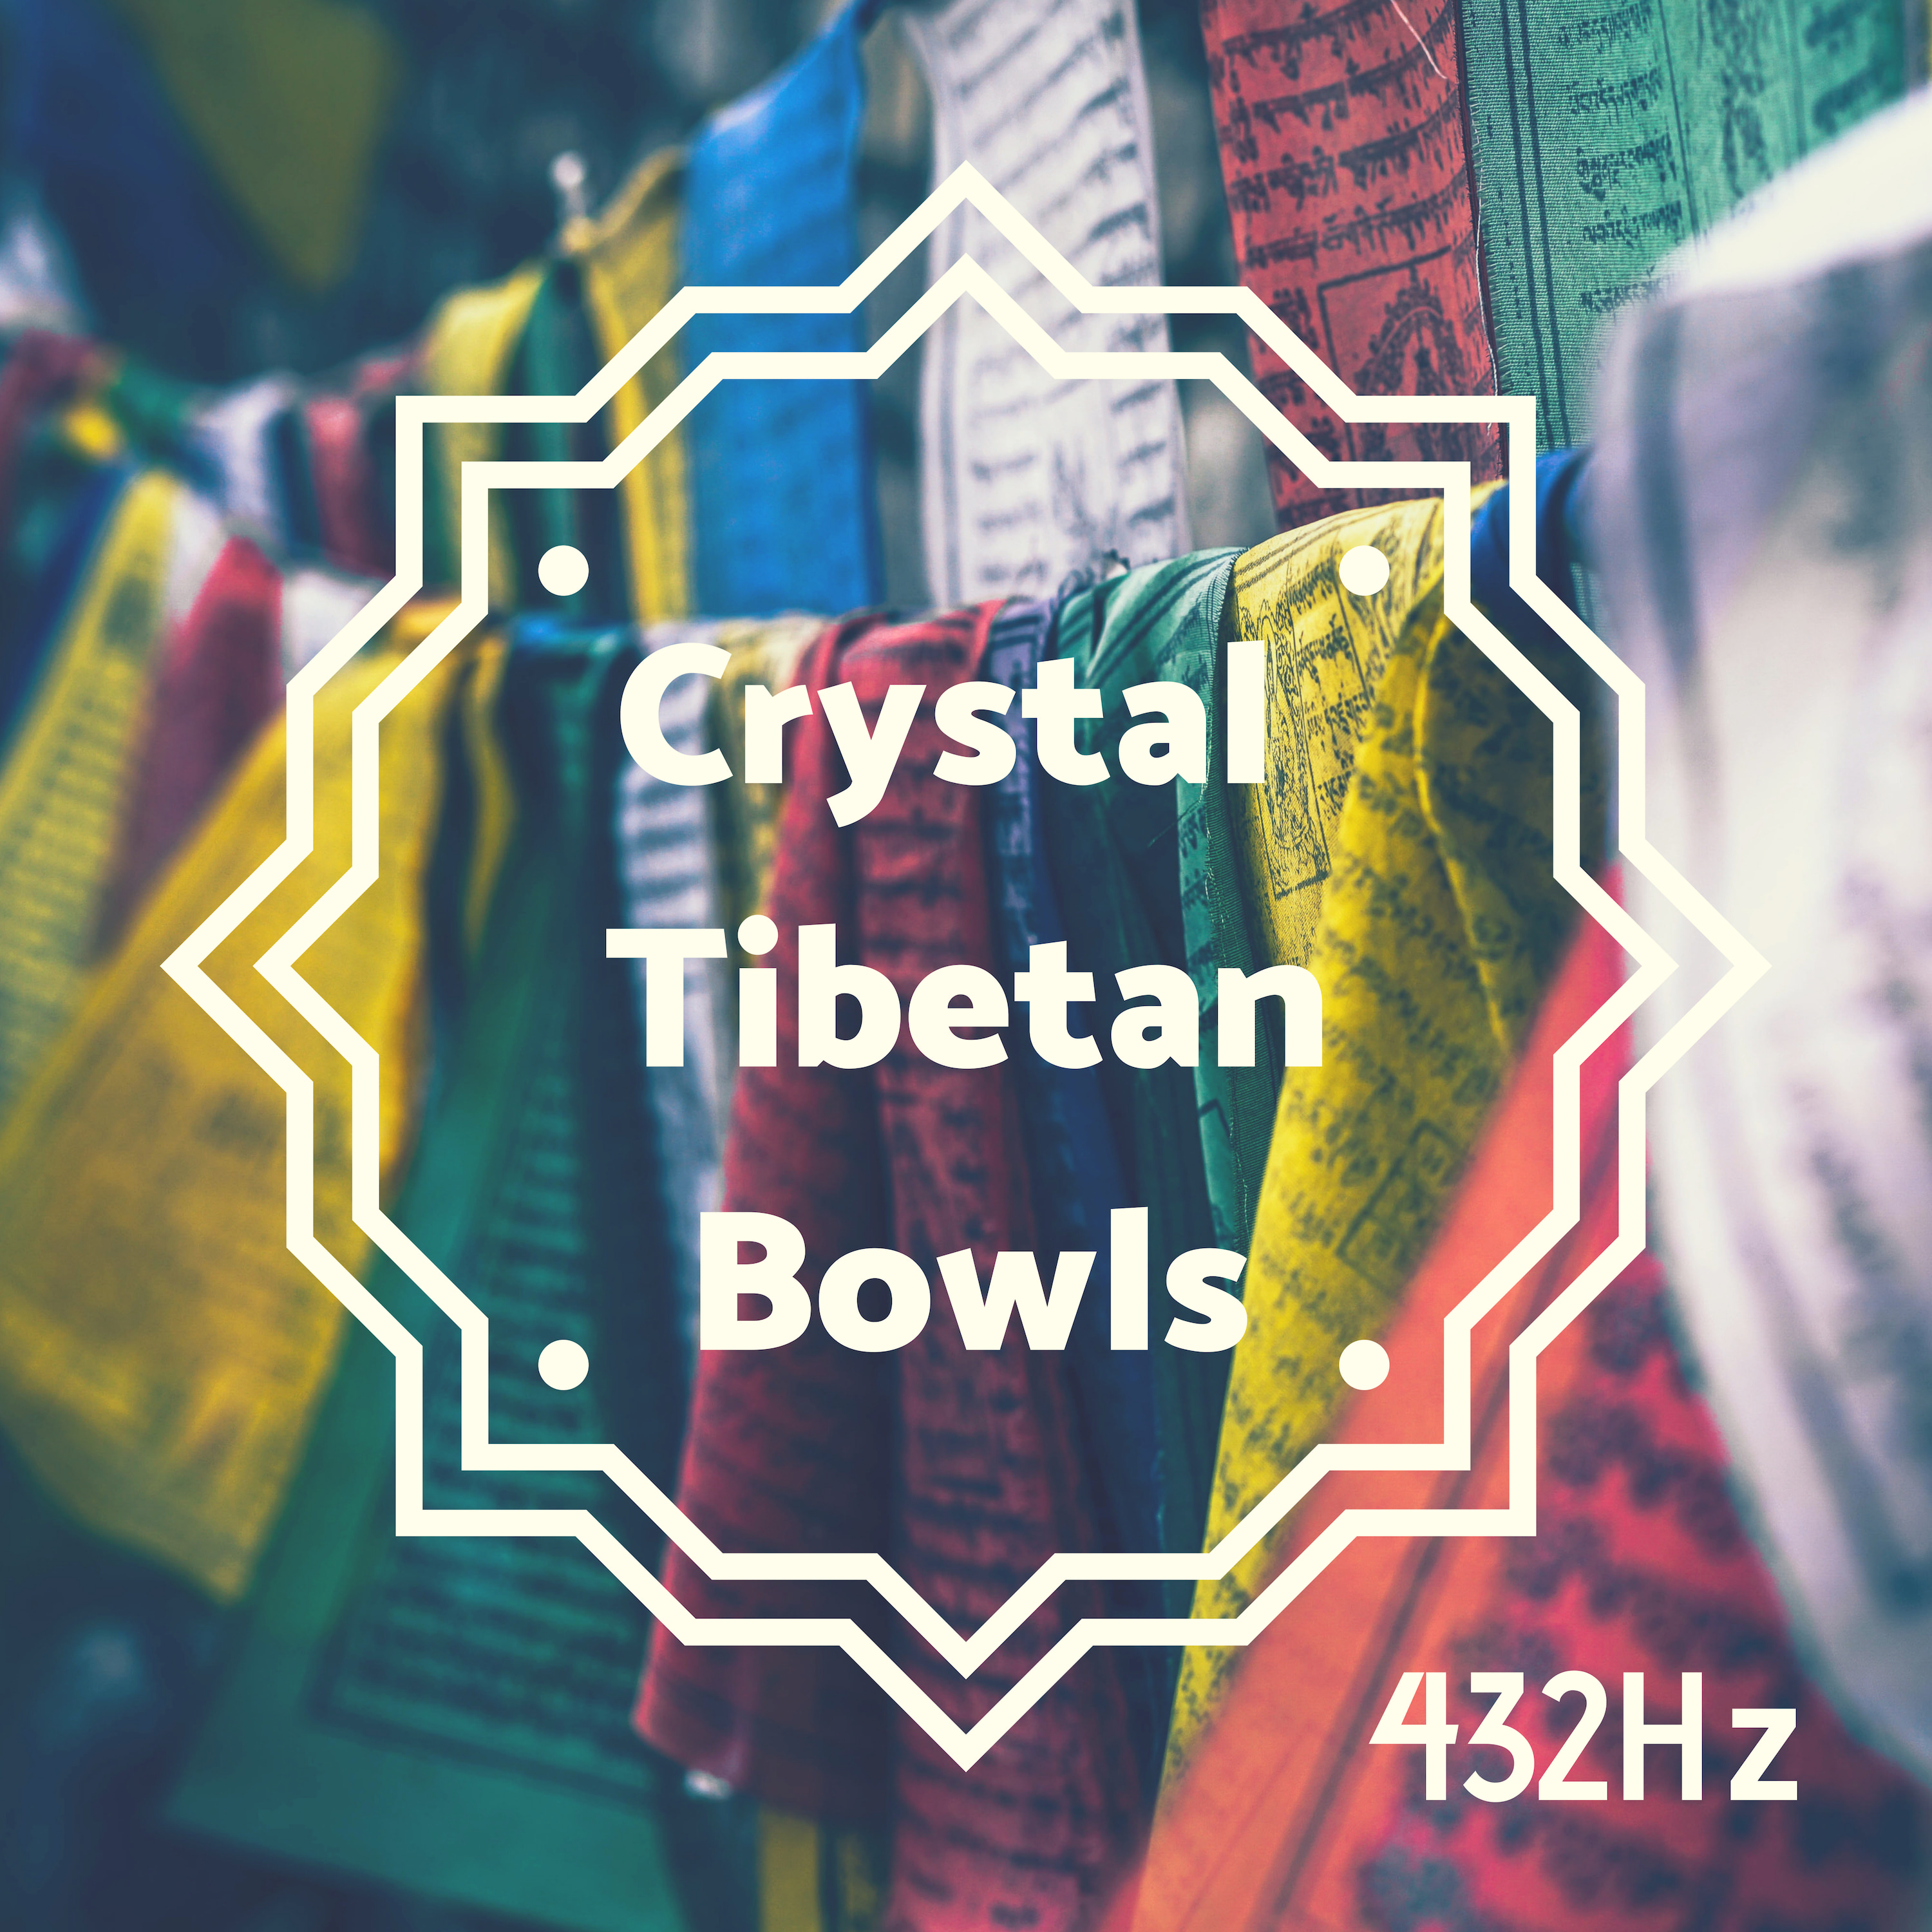 Crystal Tibetan Bowls 432Hz - Heal Chakras with Soothing Frequencies to Balance Energy